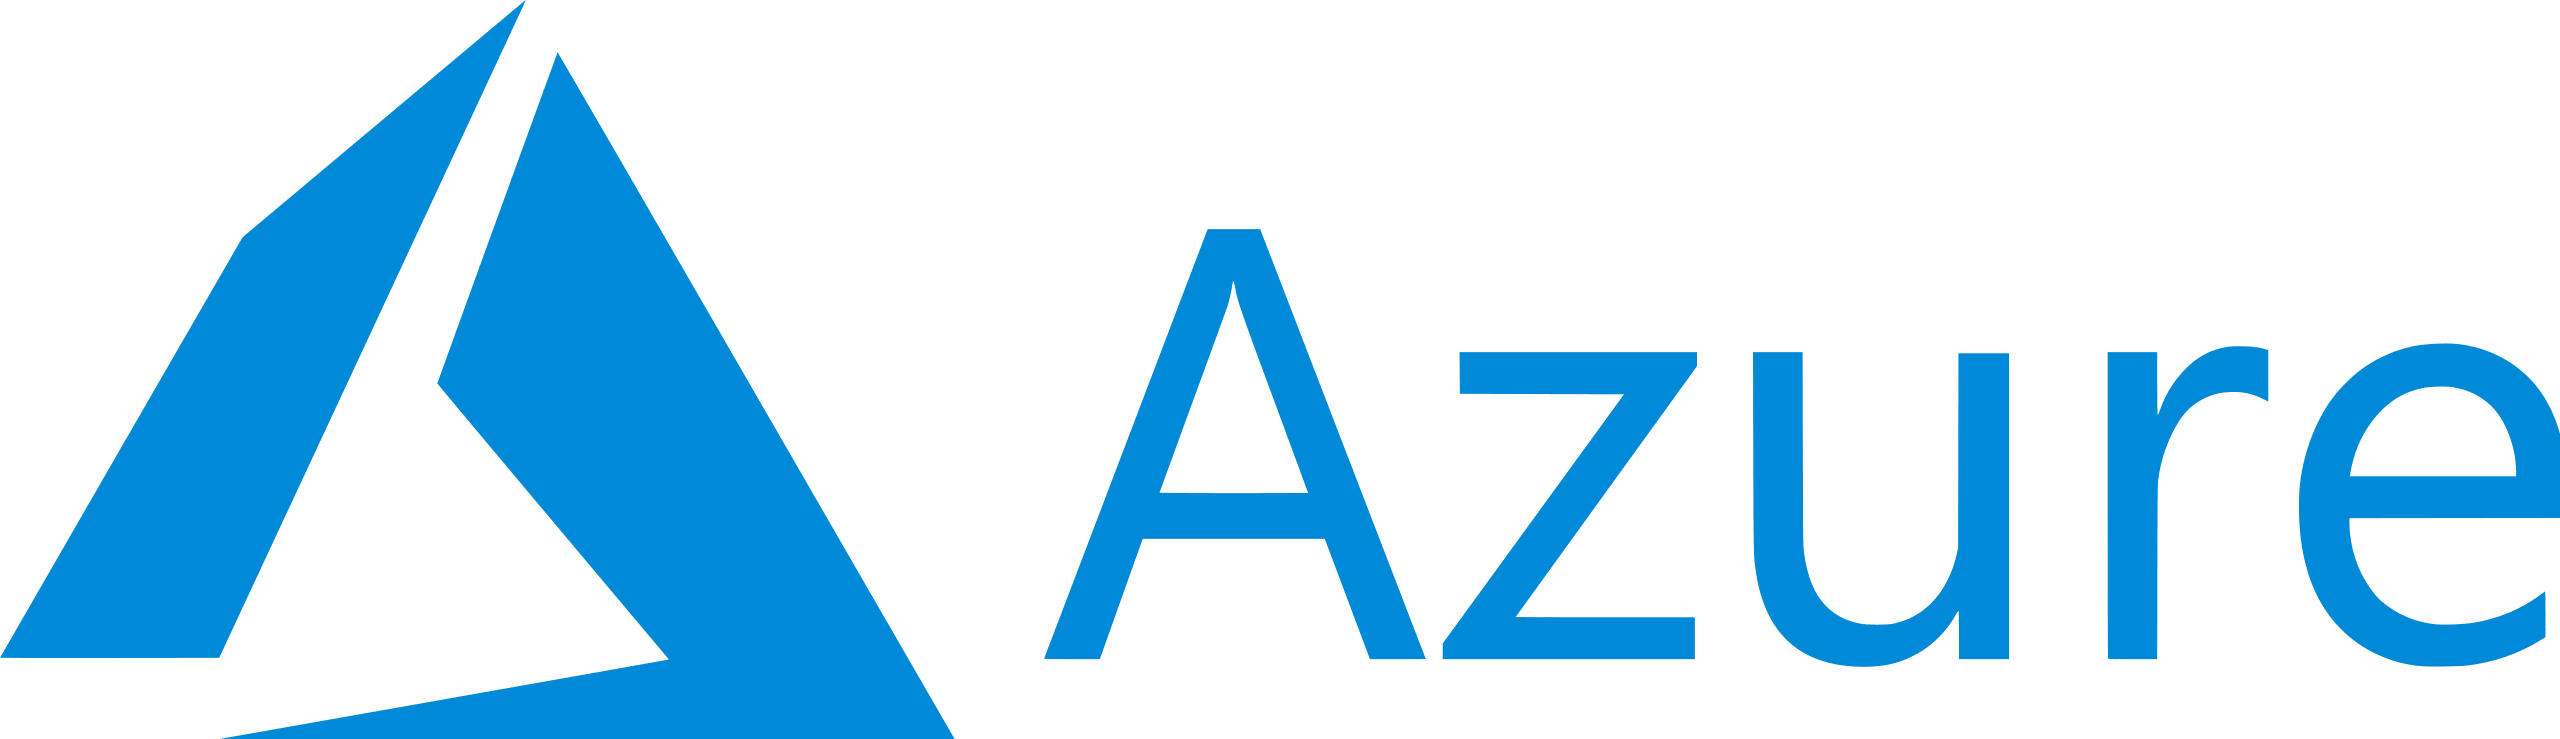 The image shows the Microsoft Azure logo. The logo features a stylized, angular blue "A" shape on the left, representing a cloud, accompanied by the word "Azure" written in a sans-serif font on the right. The entire graphic is in blue.